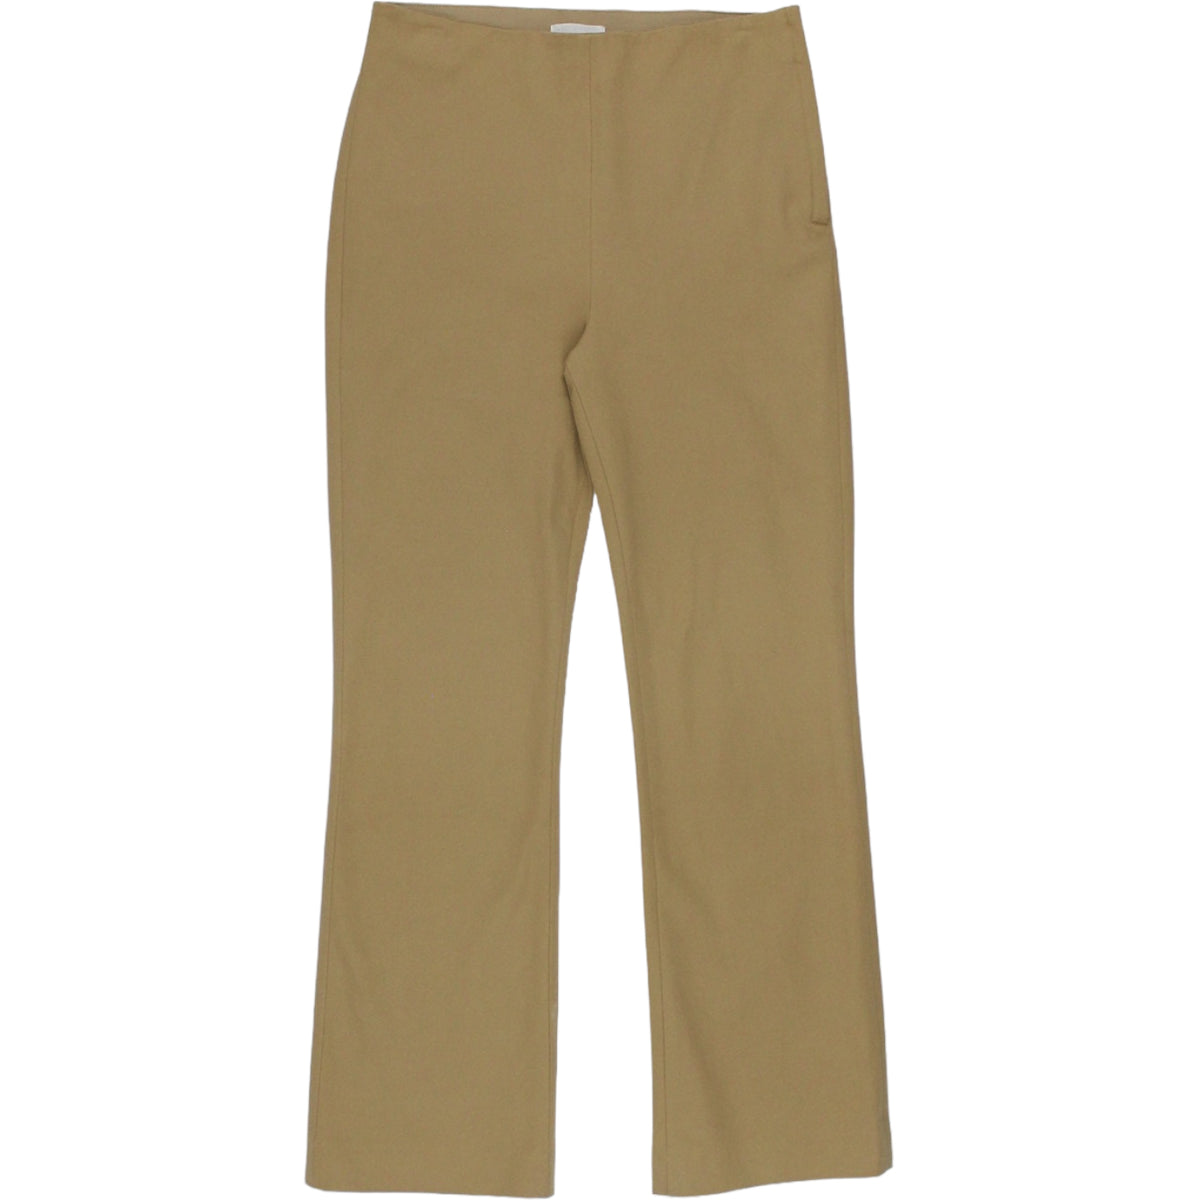 Arket Sand Flat Front Trousers